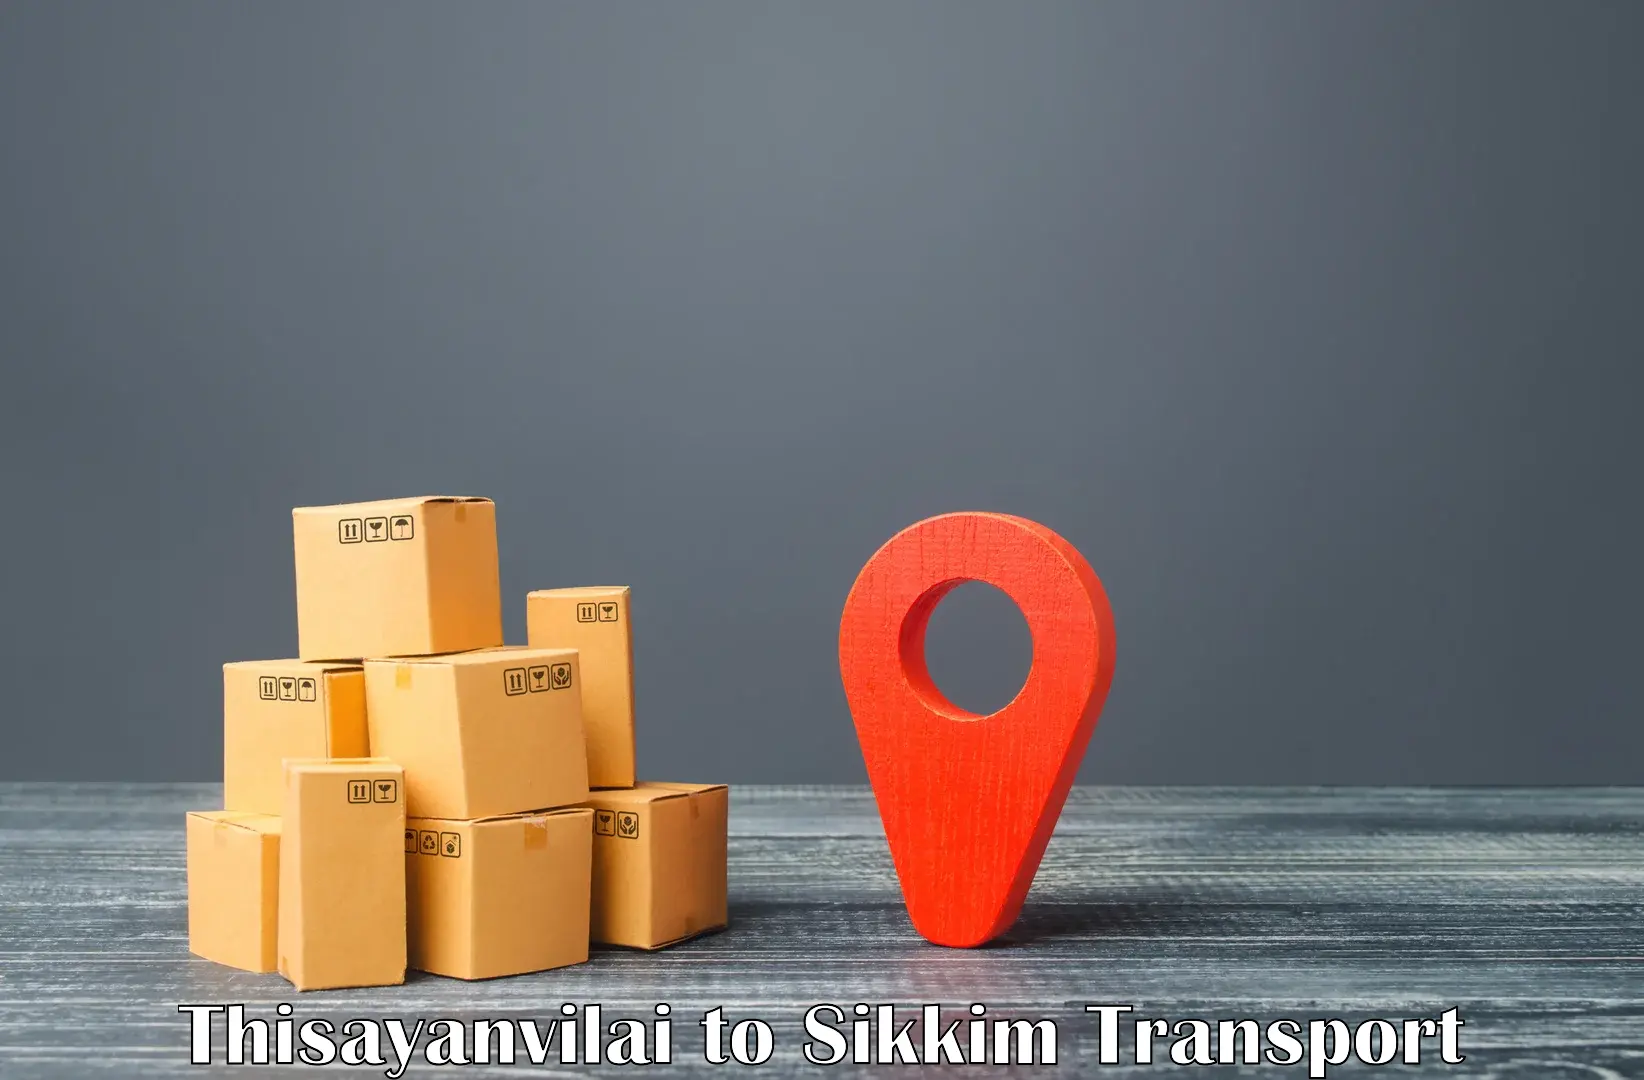 Container transport service Thisayanvilai to Mangan